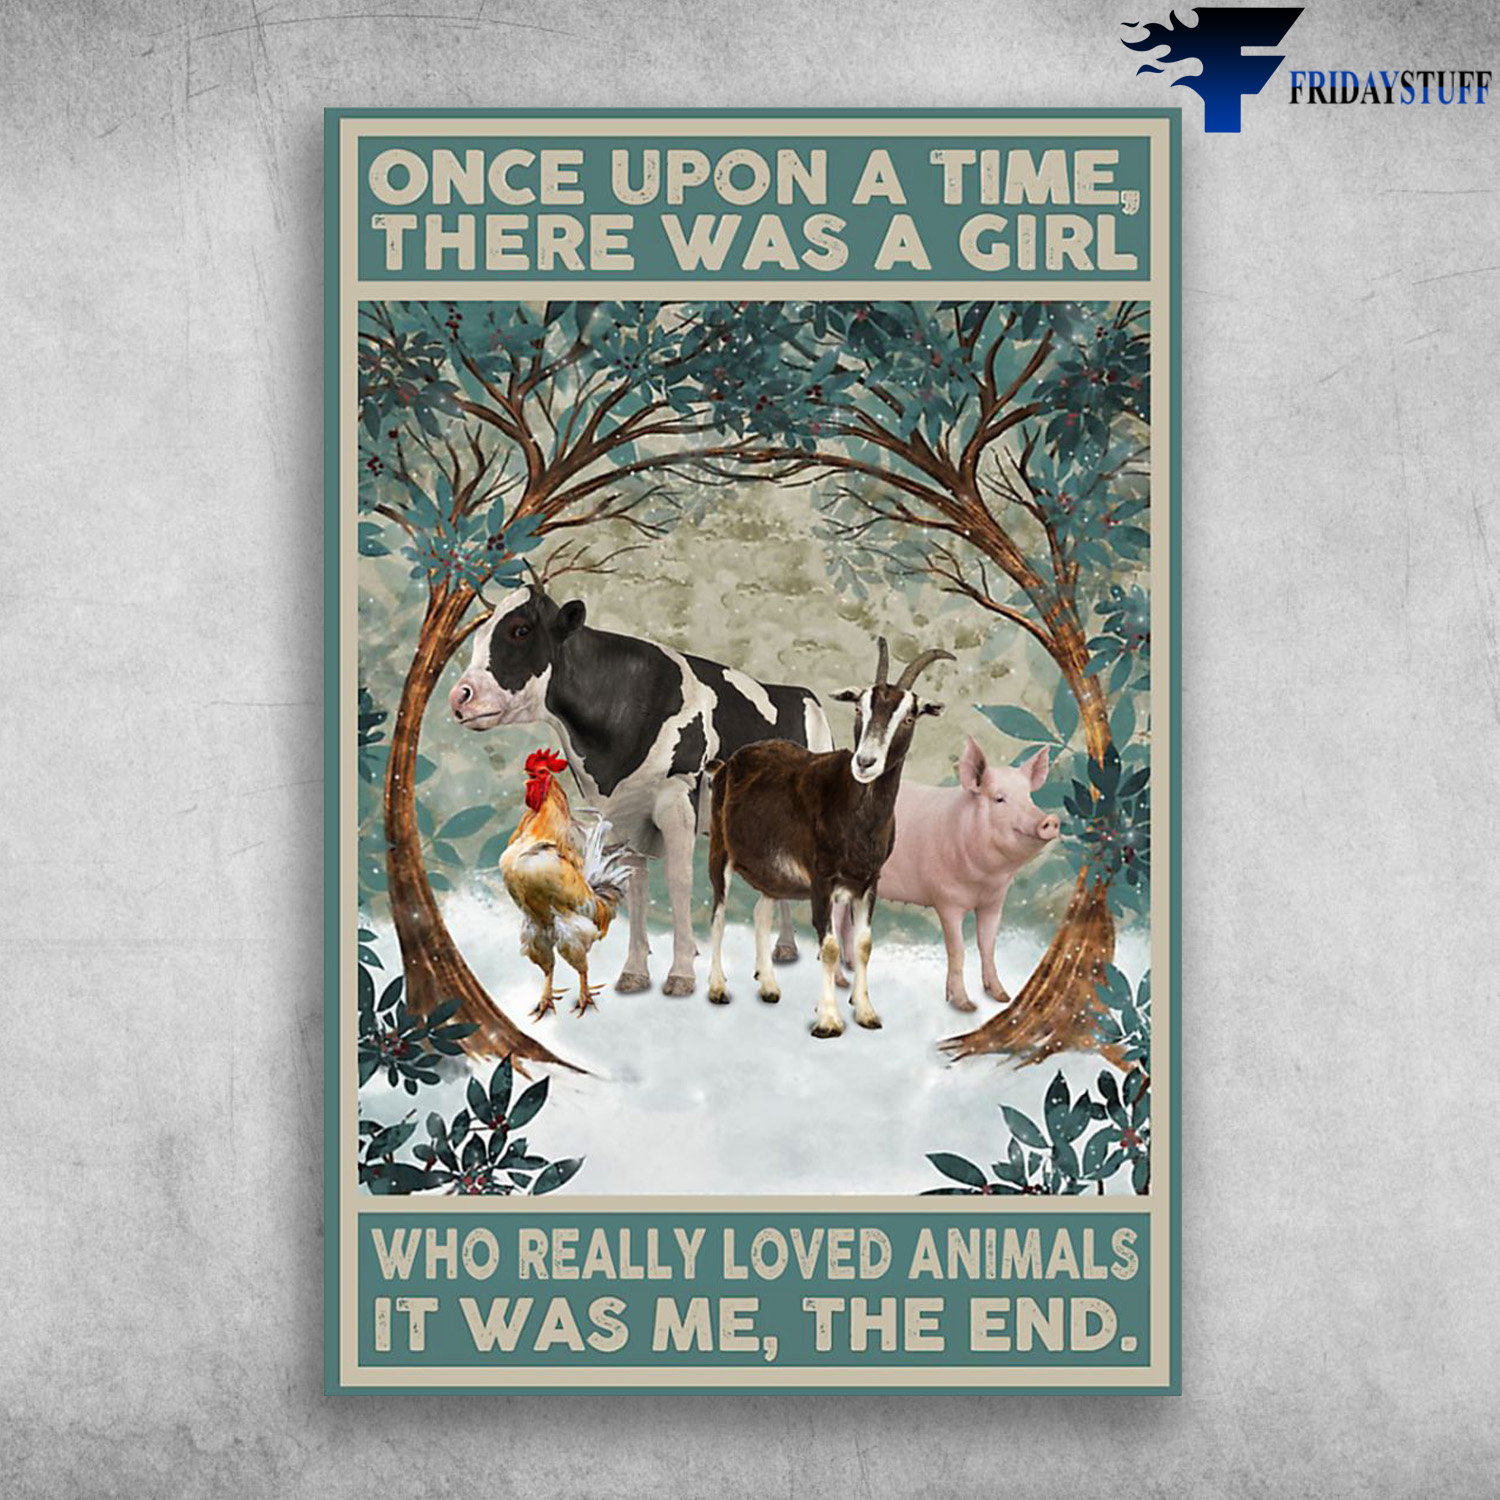 The Animal On Farm - Once Upon A Time, There Was A Girl, Who Really Loved Animal, That Was Me, The End